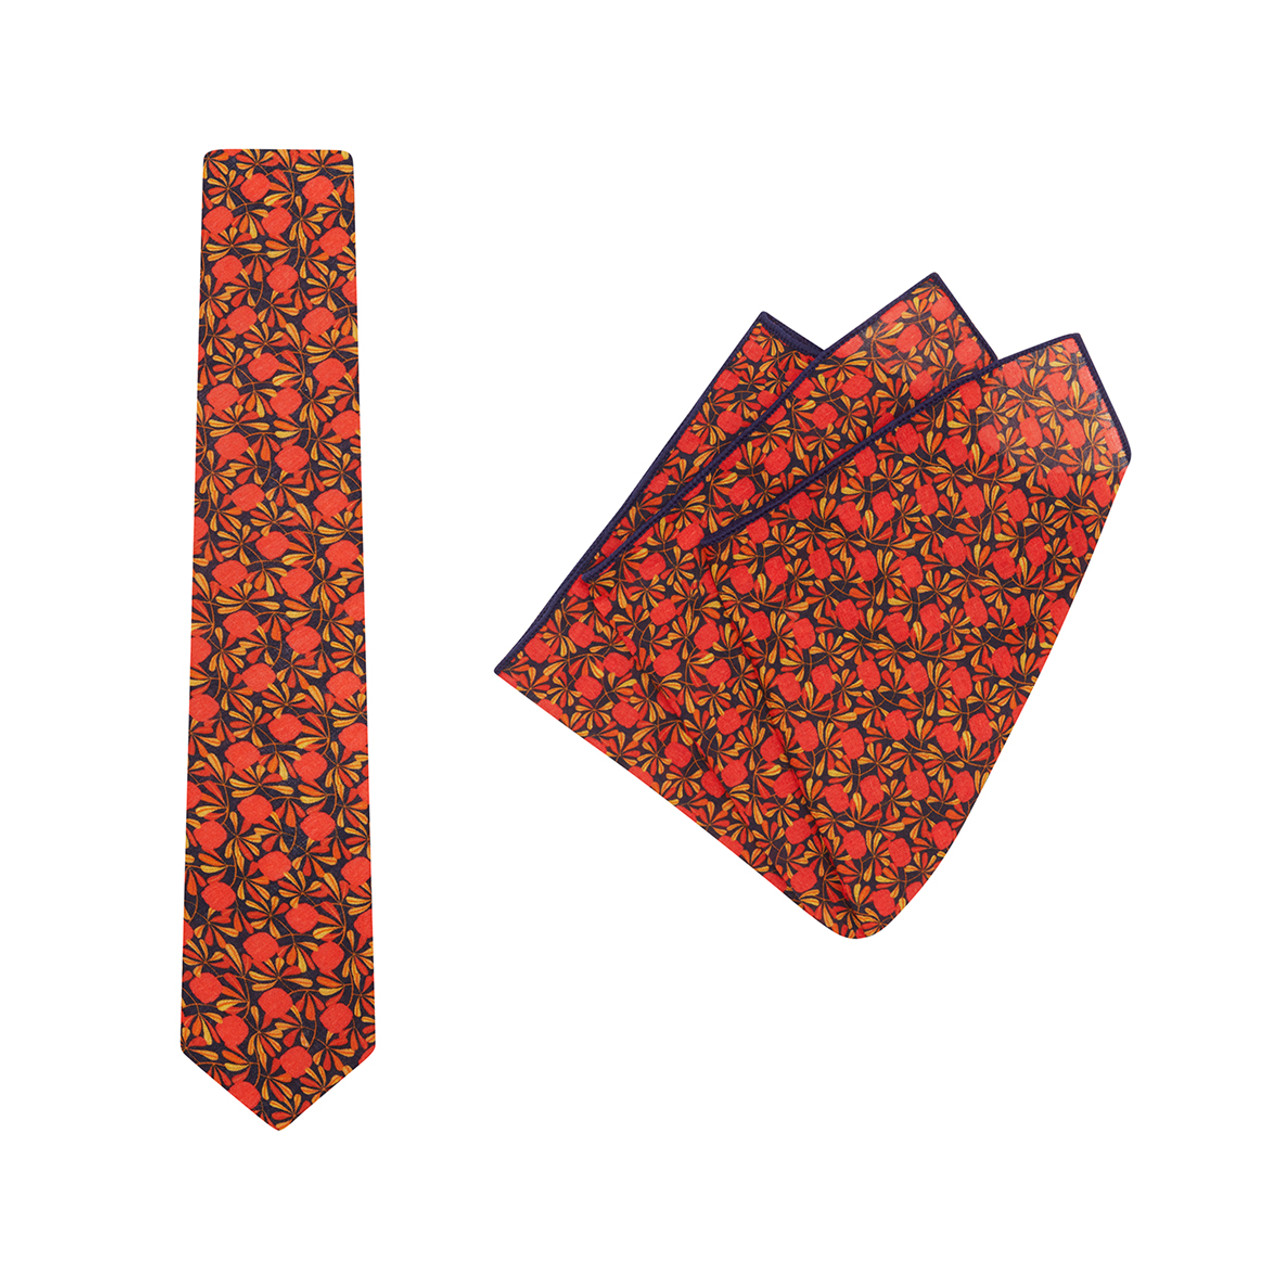 Tie + Pocket Square Set, Jocelyn Proust 6, Navy/Red. Supplied with matching pocket square.